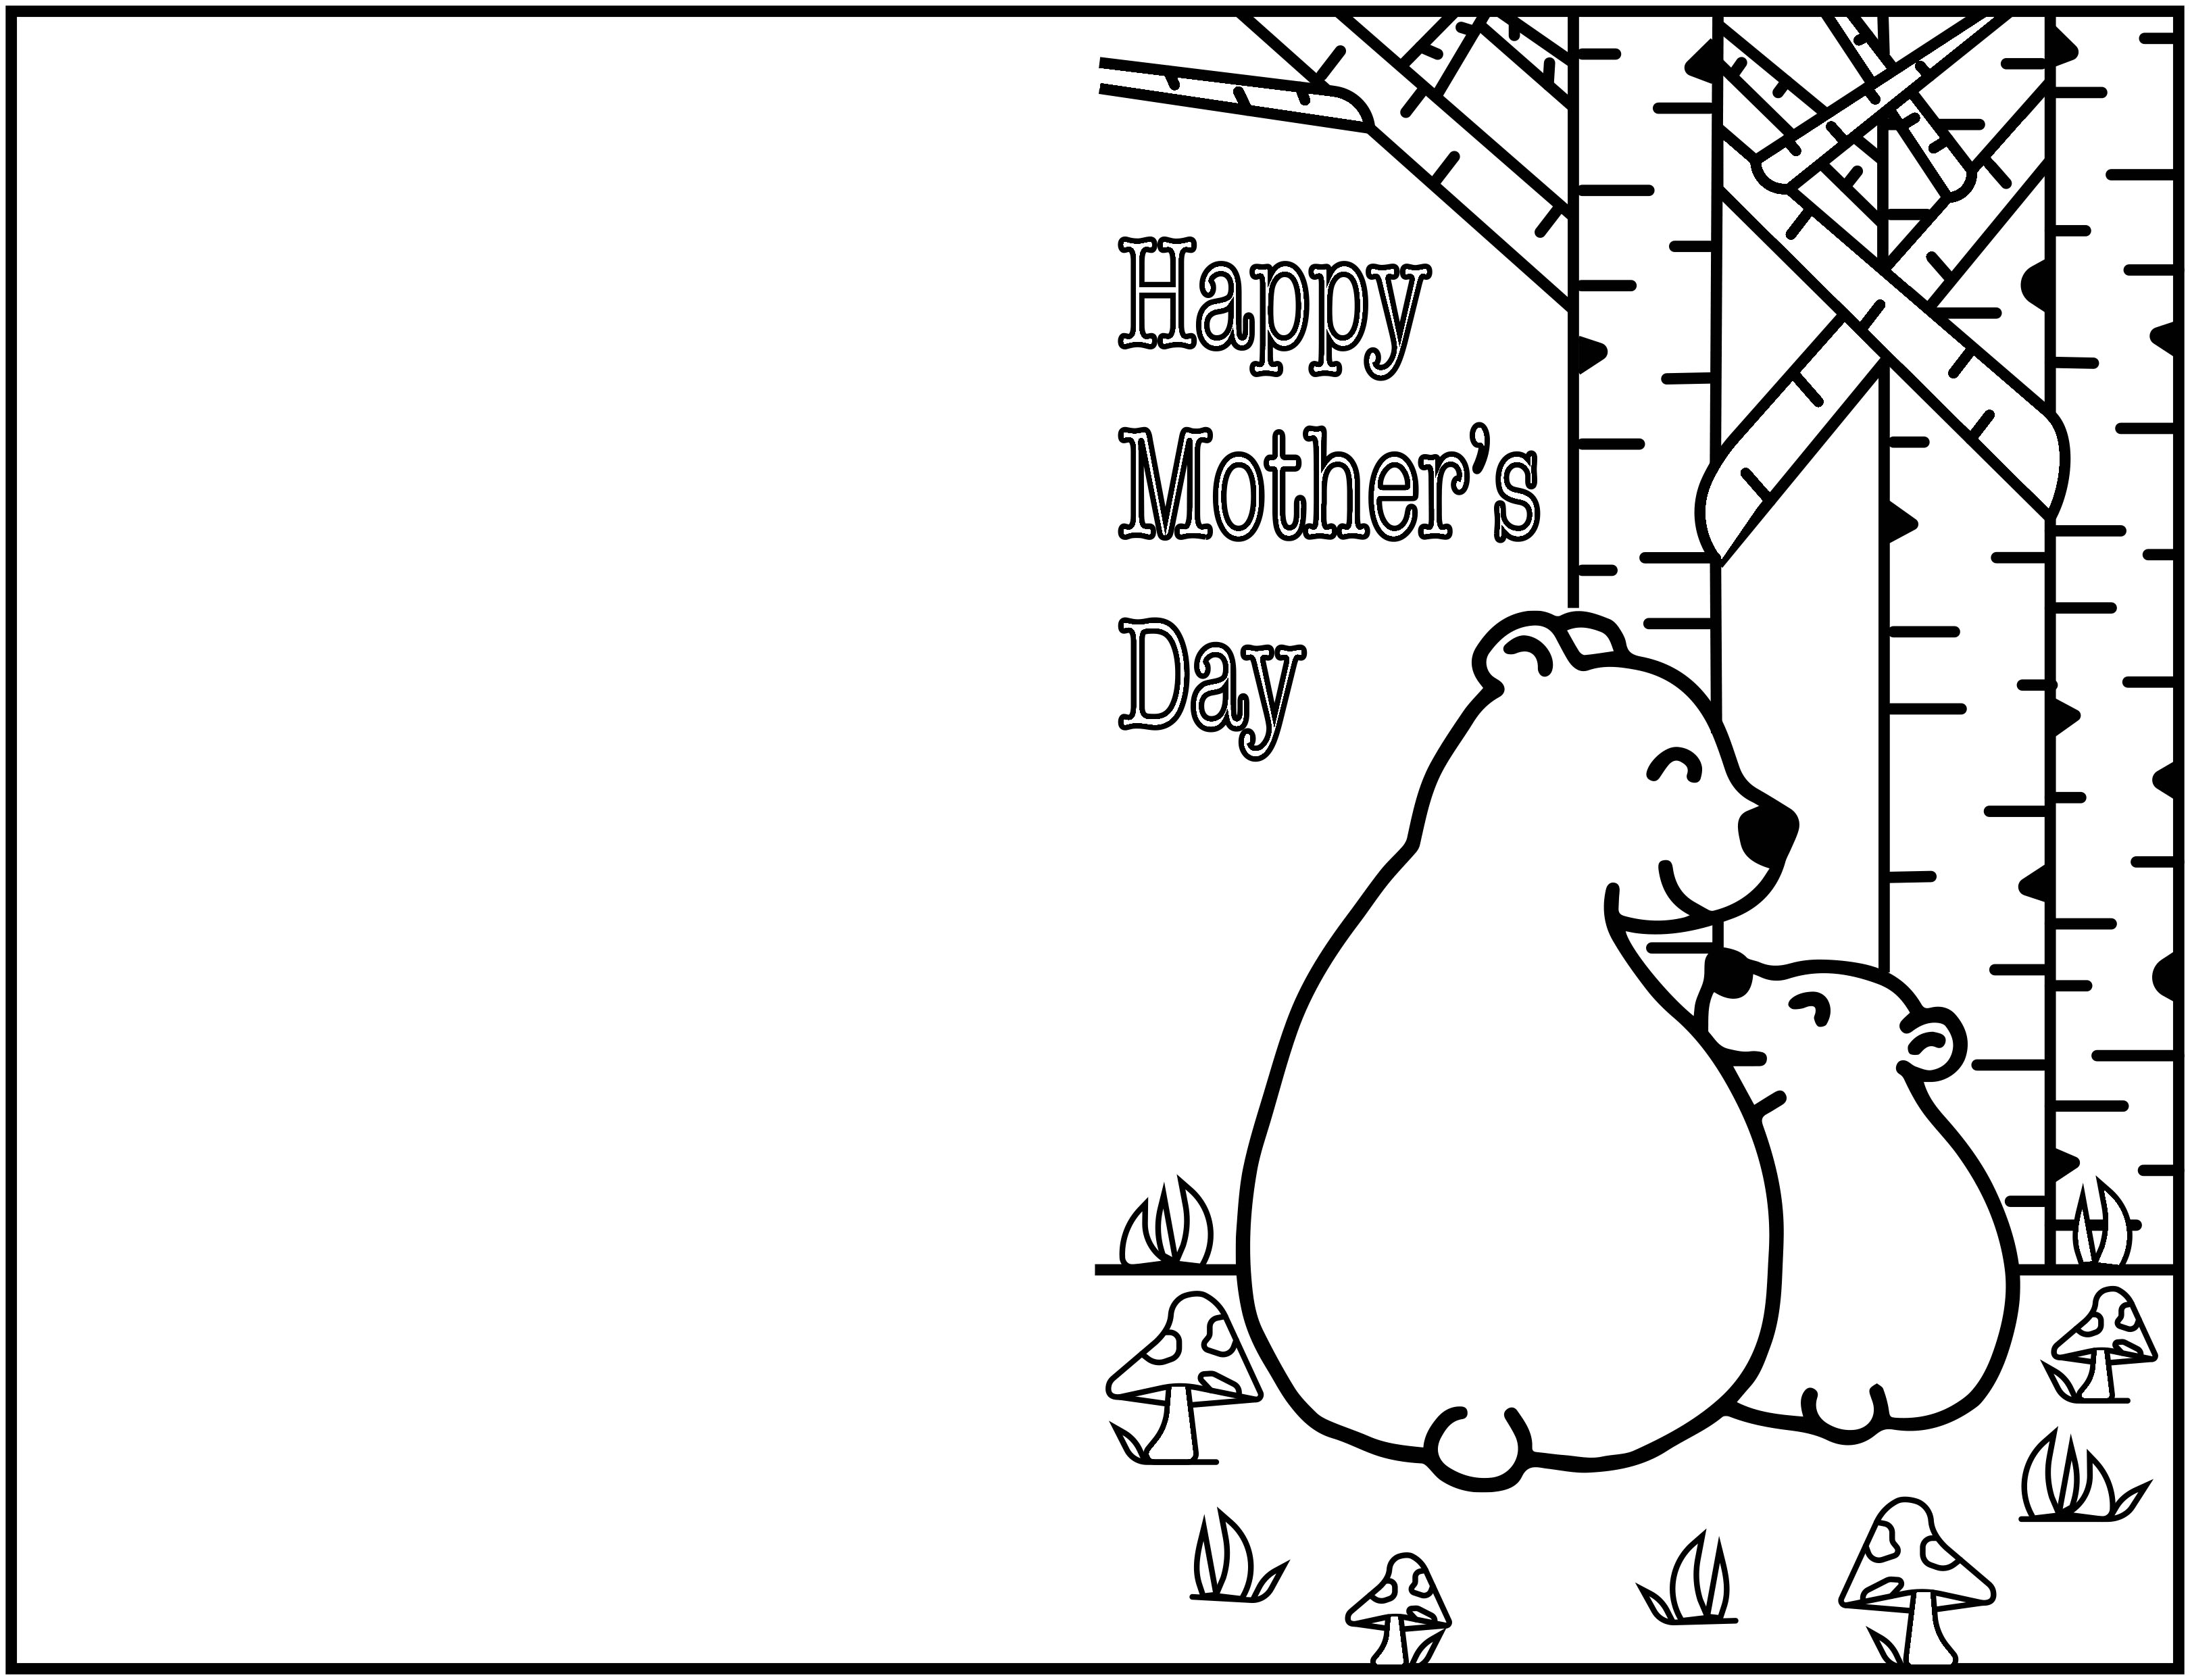 Mothers Day Card 2 copy1